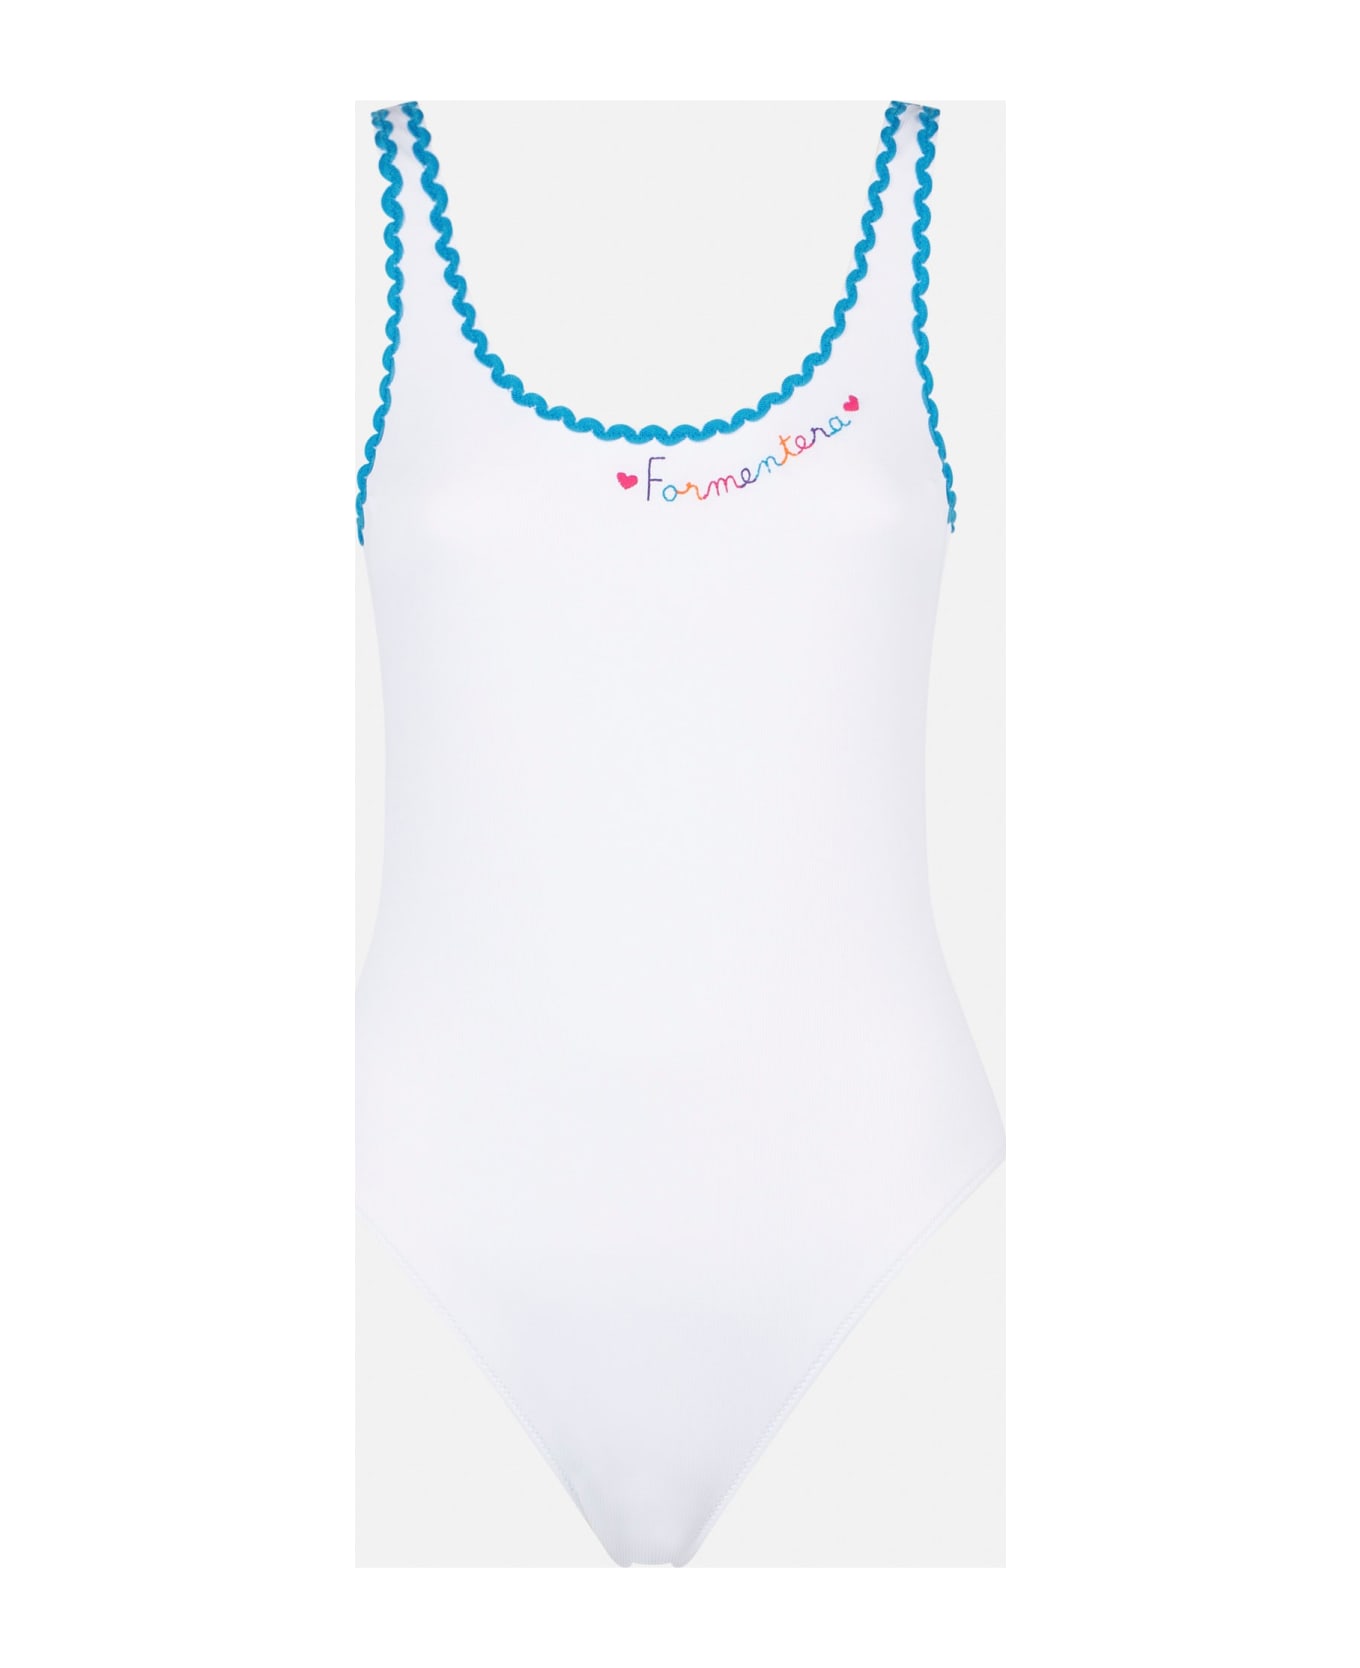 MC2 Saint Barth One Piece Swimsuit With Formentera Embroidery - WHITE